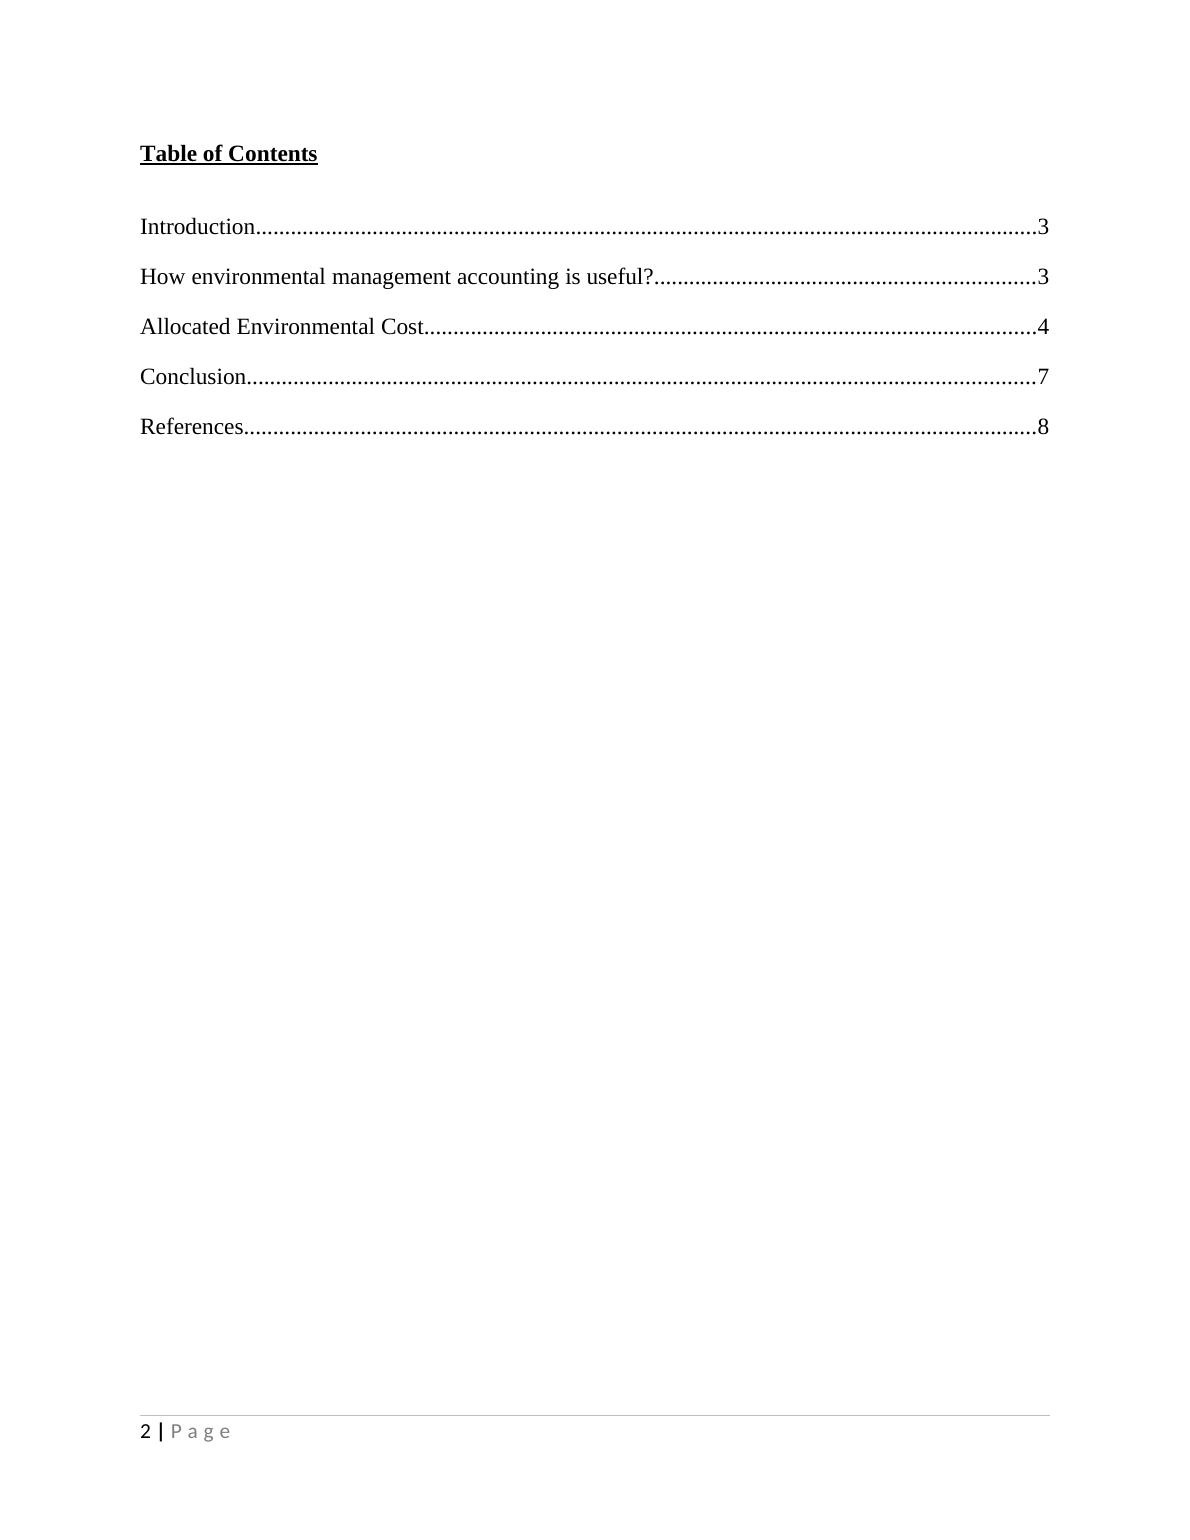 Environmental Management Accounting - Assignment_2